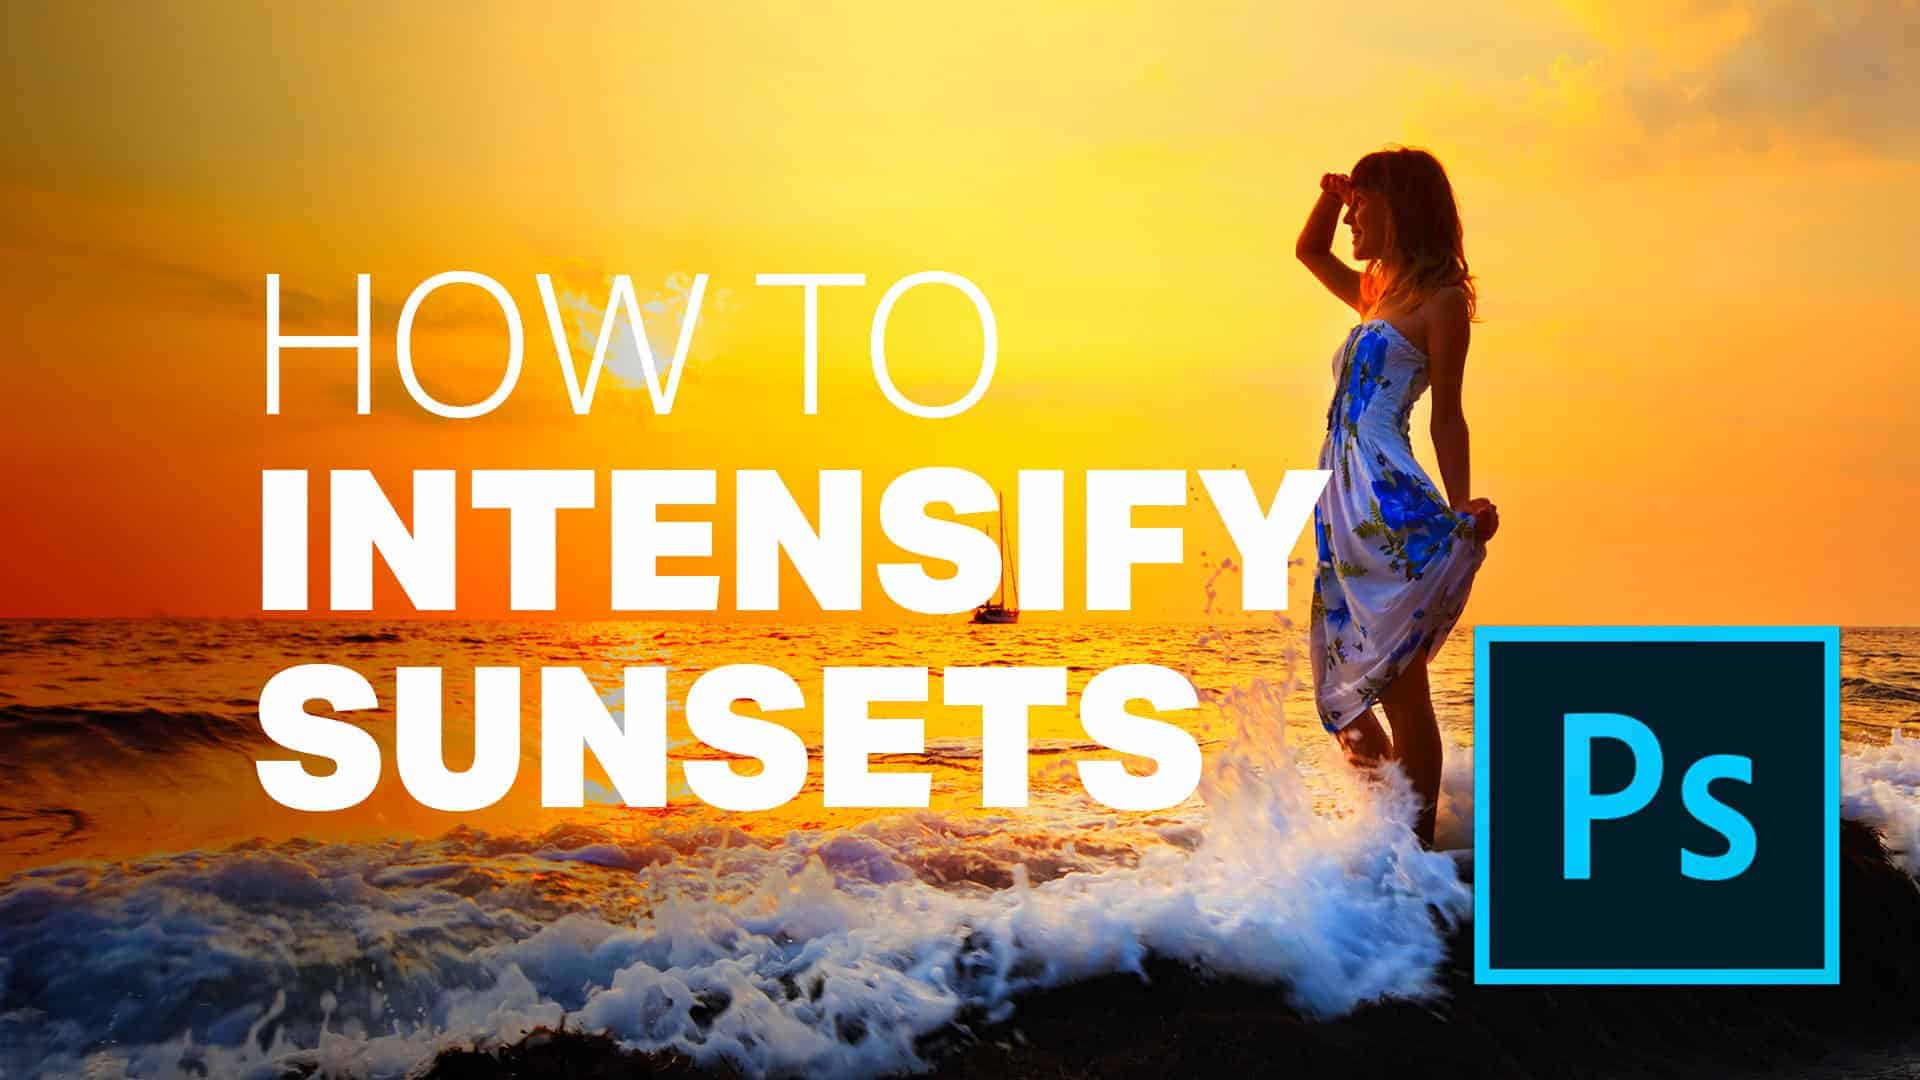 New Photoshop Trick to Improve and Intensify Sunset Photos